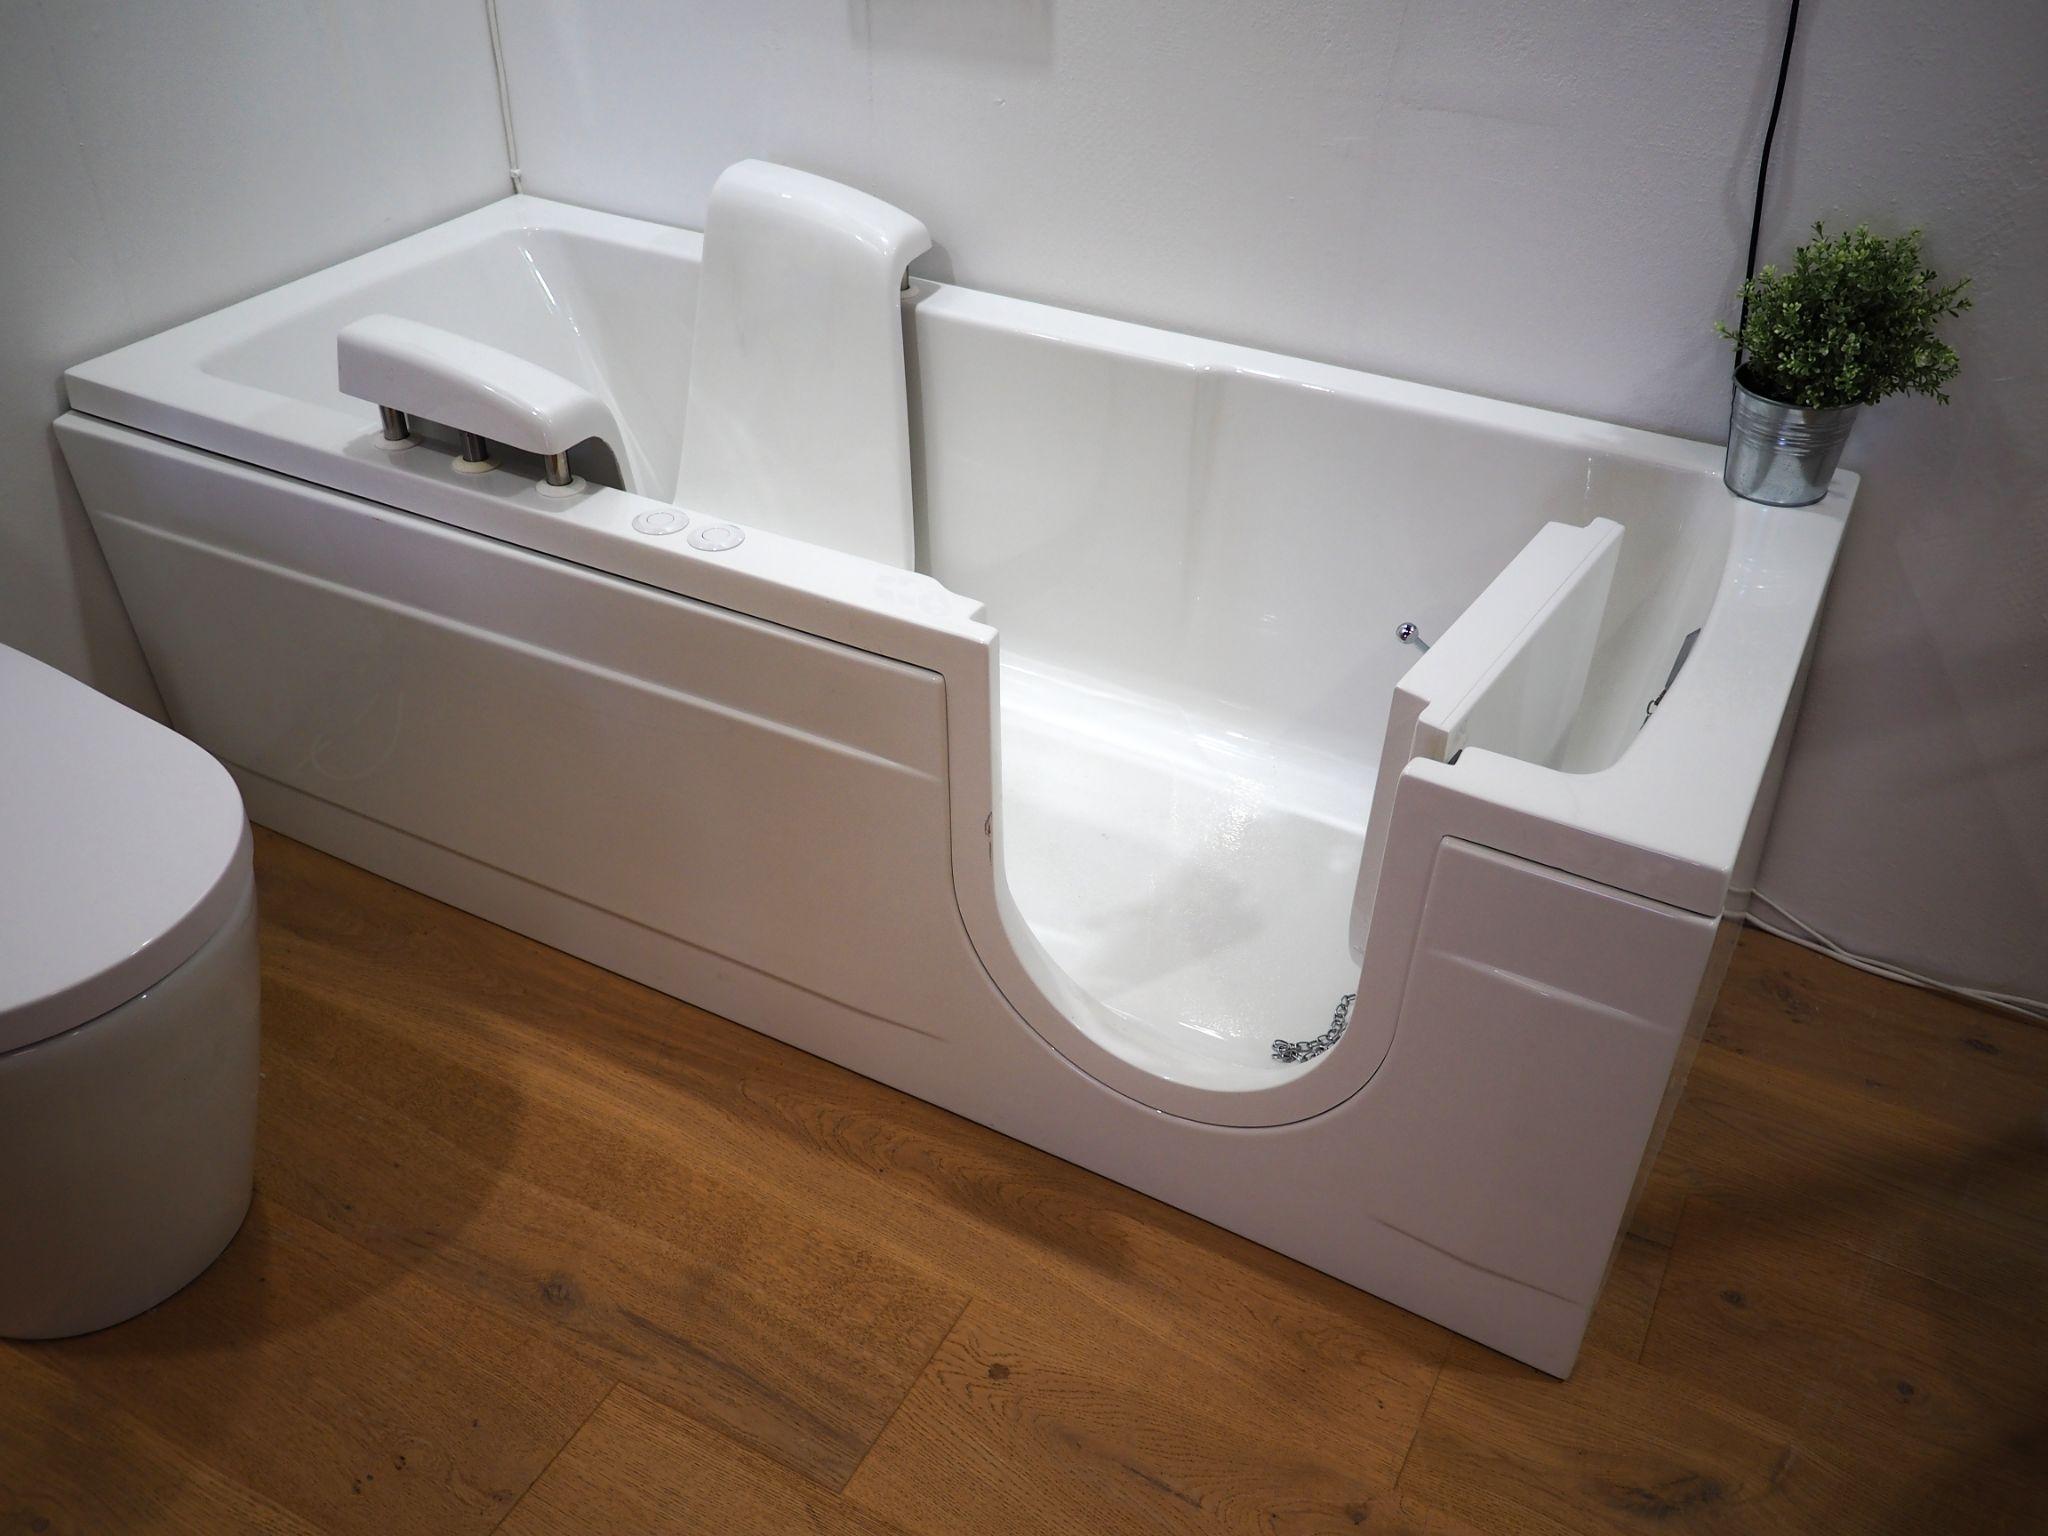 Handicapped disabled access bathroom bathtub with electric handles